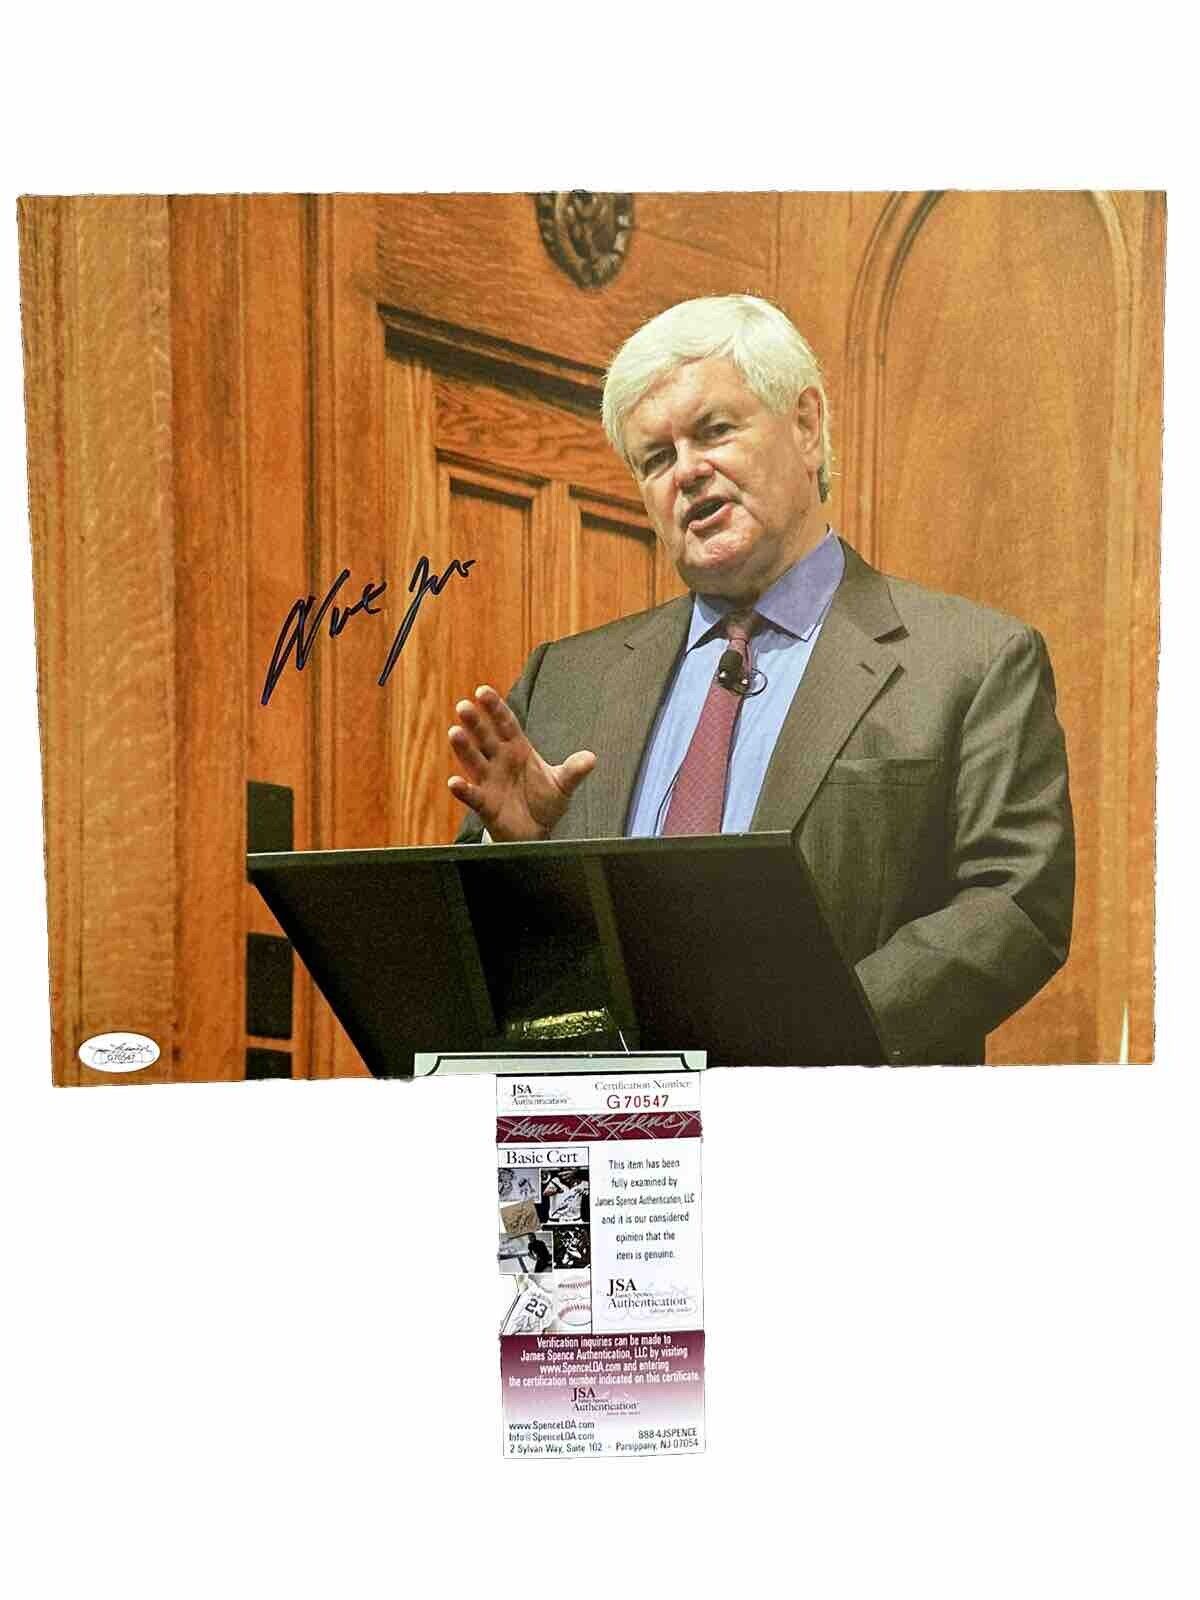 NEWT GINGRICH HAND SIGNED AUTOGRAPHED 11x14 PHOTO-SPEAKER OF THE HOUSE JSA CERT